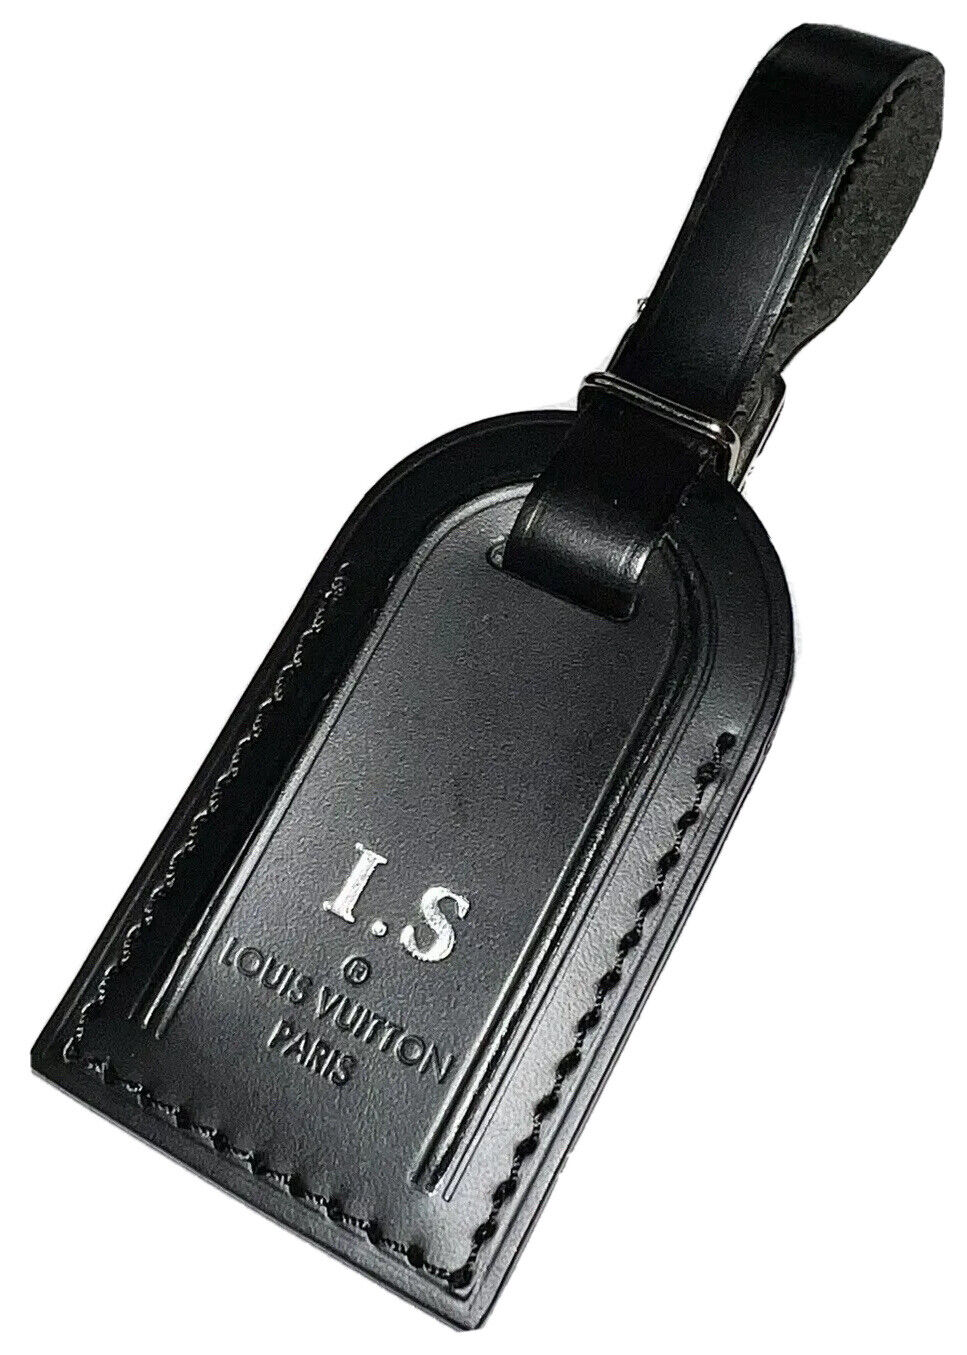 Louis Vuitton Luggage Tag w/ IS Initials Black Leather Small - Silvertone UEC